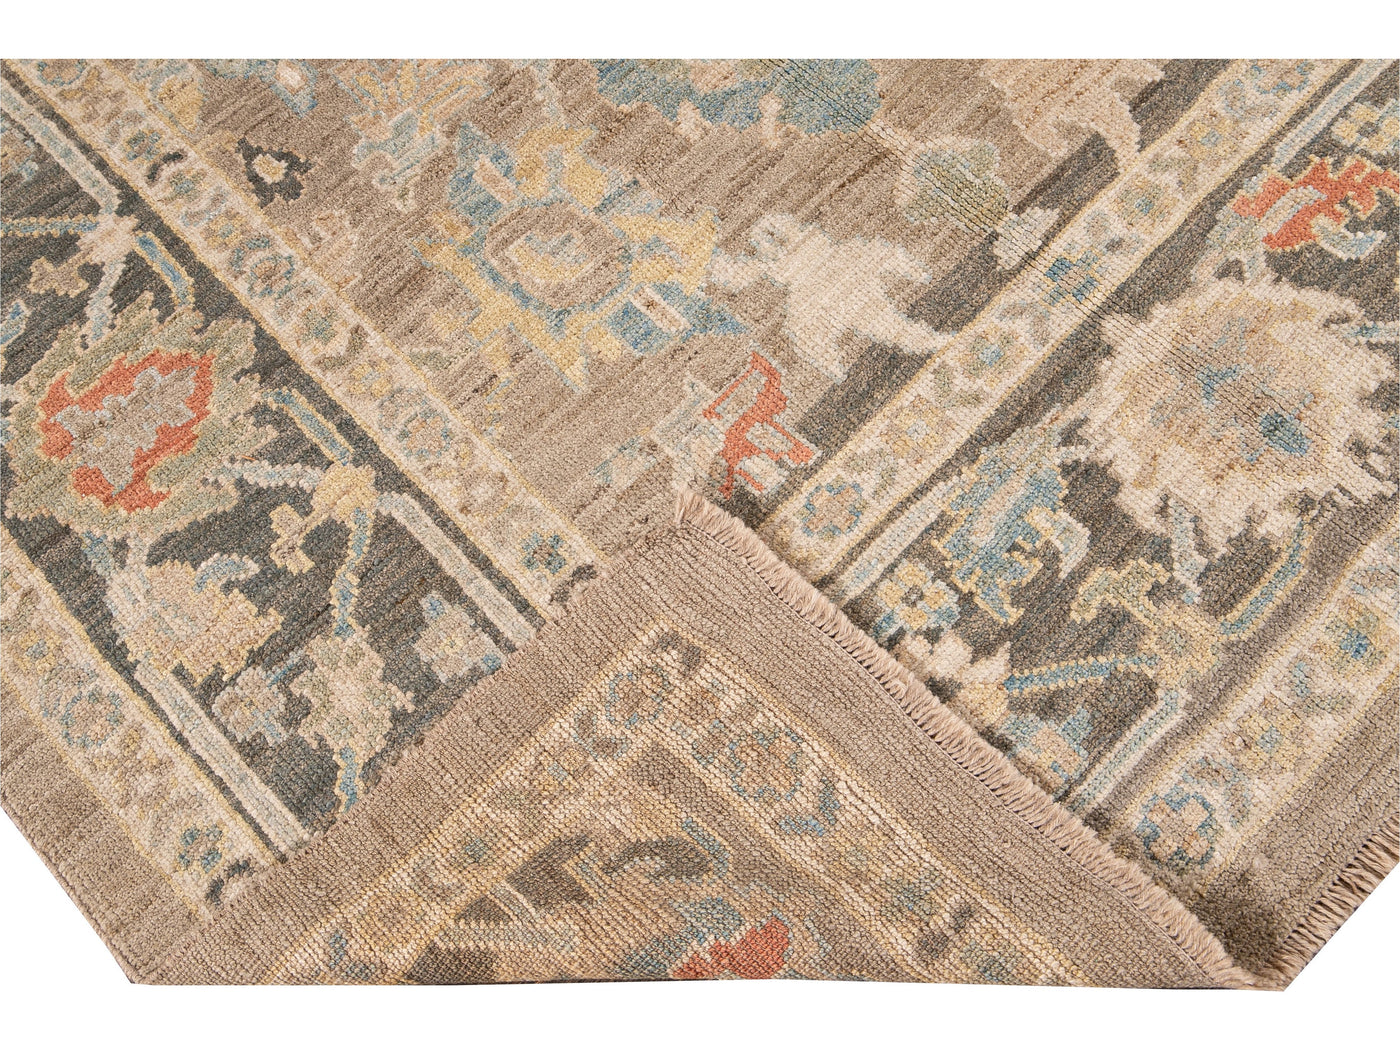 Modern Sultanabad Beige and Gray Handmade Floral Wool Rug